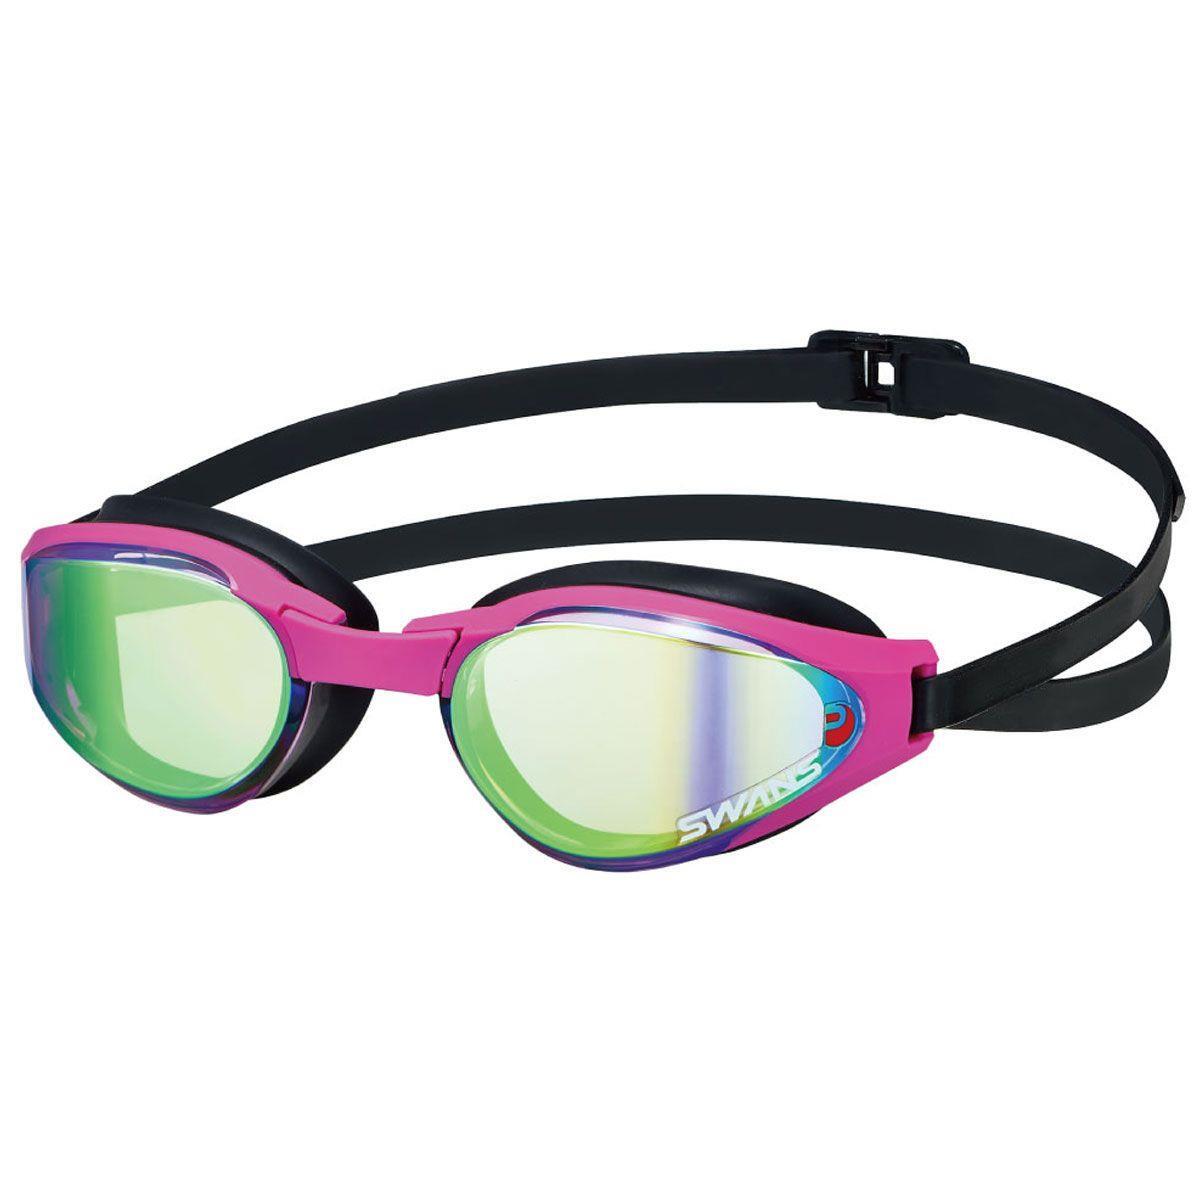 Swans SR81 Ascender Mirrored Goggles- Pink / Yellow 1/1